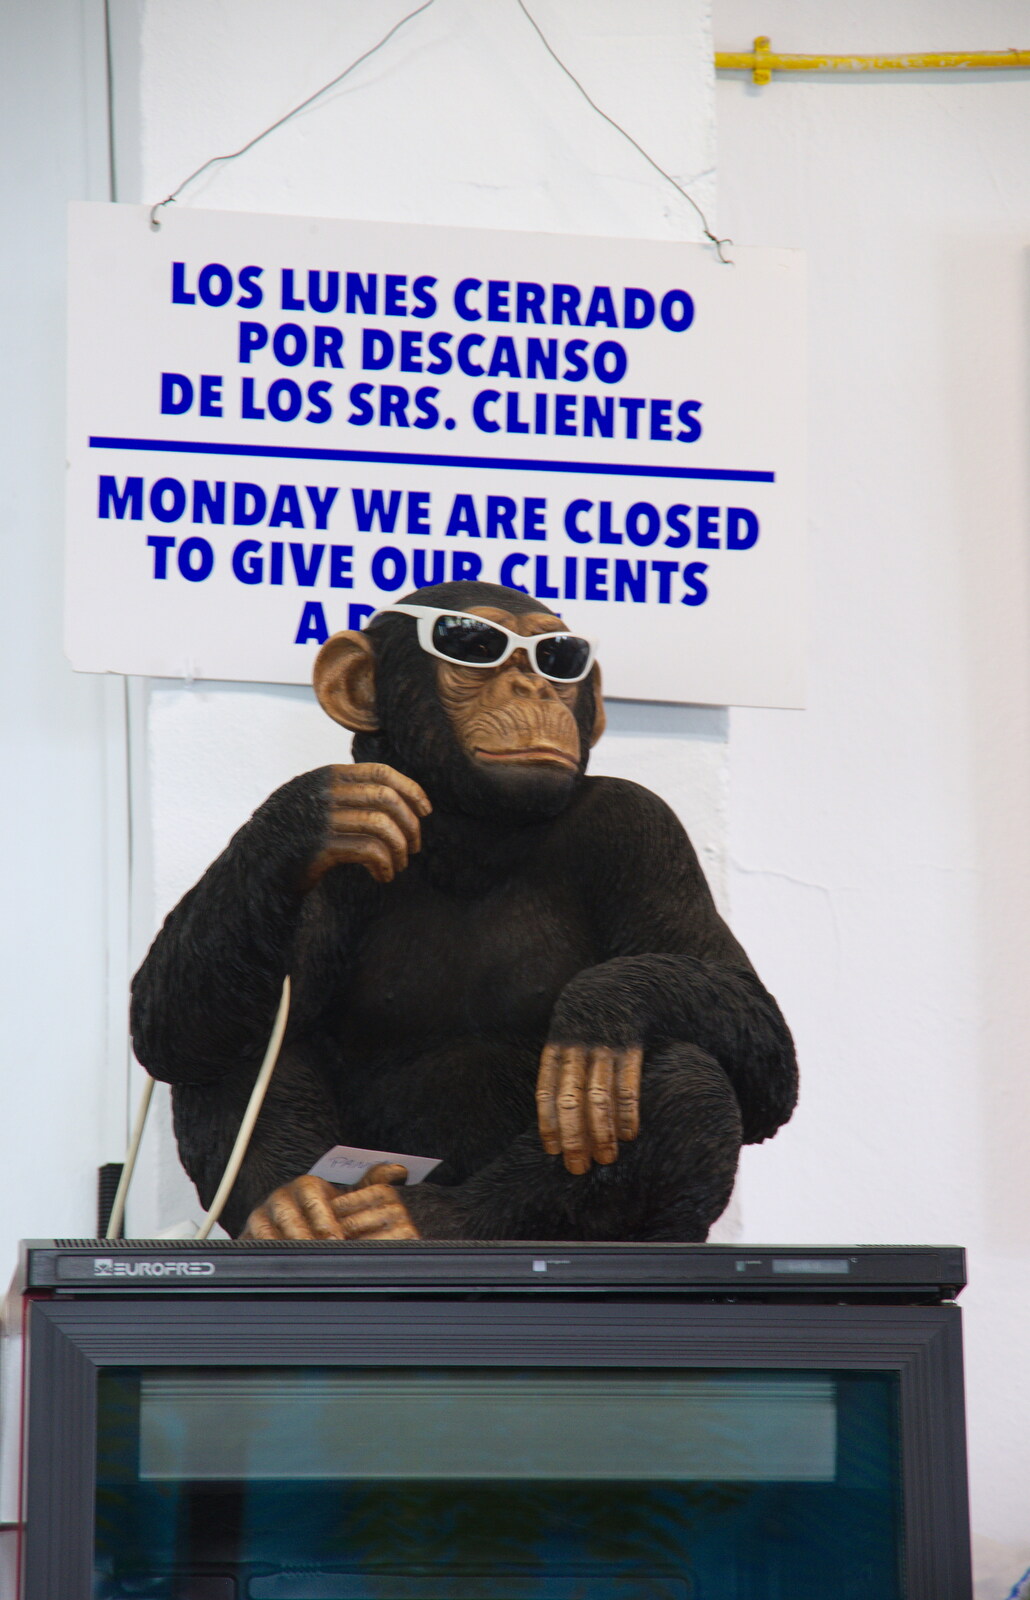 A comedy chimpanzee on a fridge from Torrecilla Beach and the Nerja Museum, Andalusia, Spain - 17th April 2019